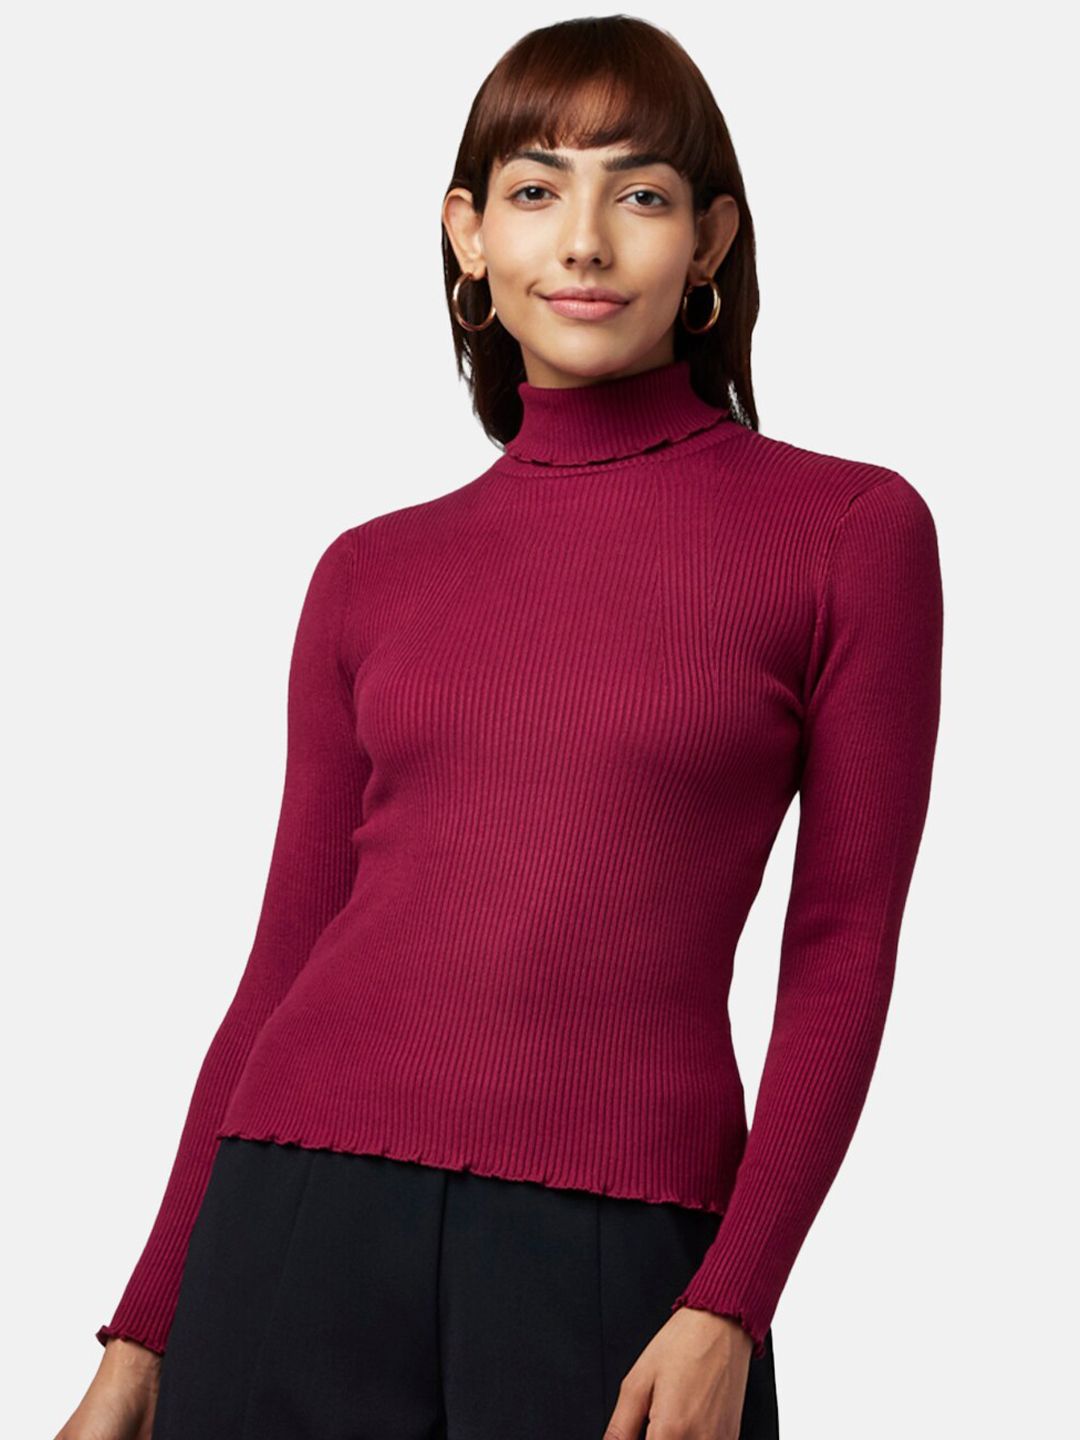 Honey by Pantaloons Maroon Solid Fitted Long Sleeves Top Price in India